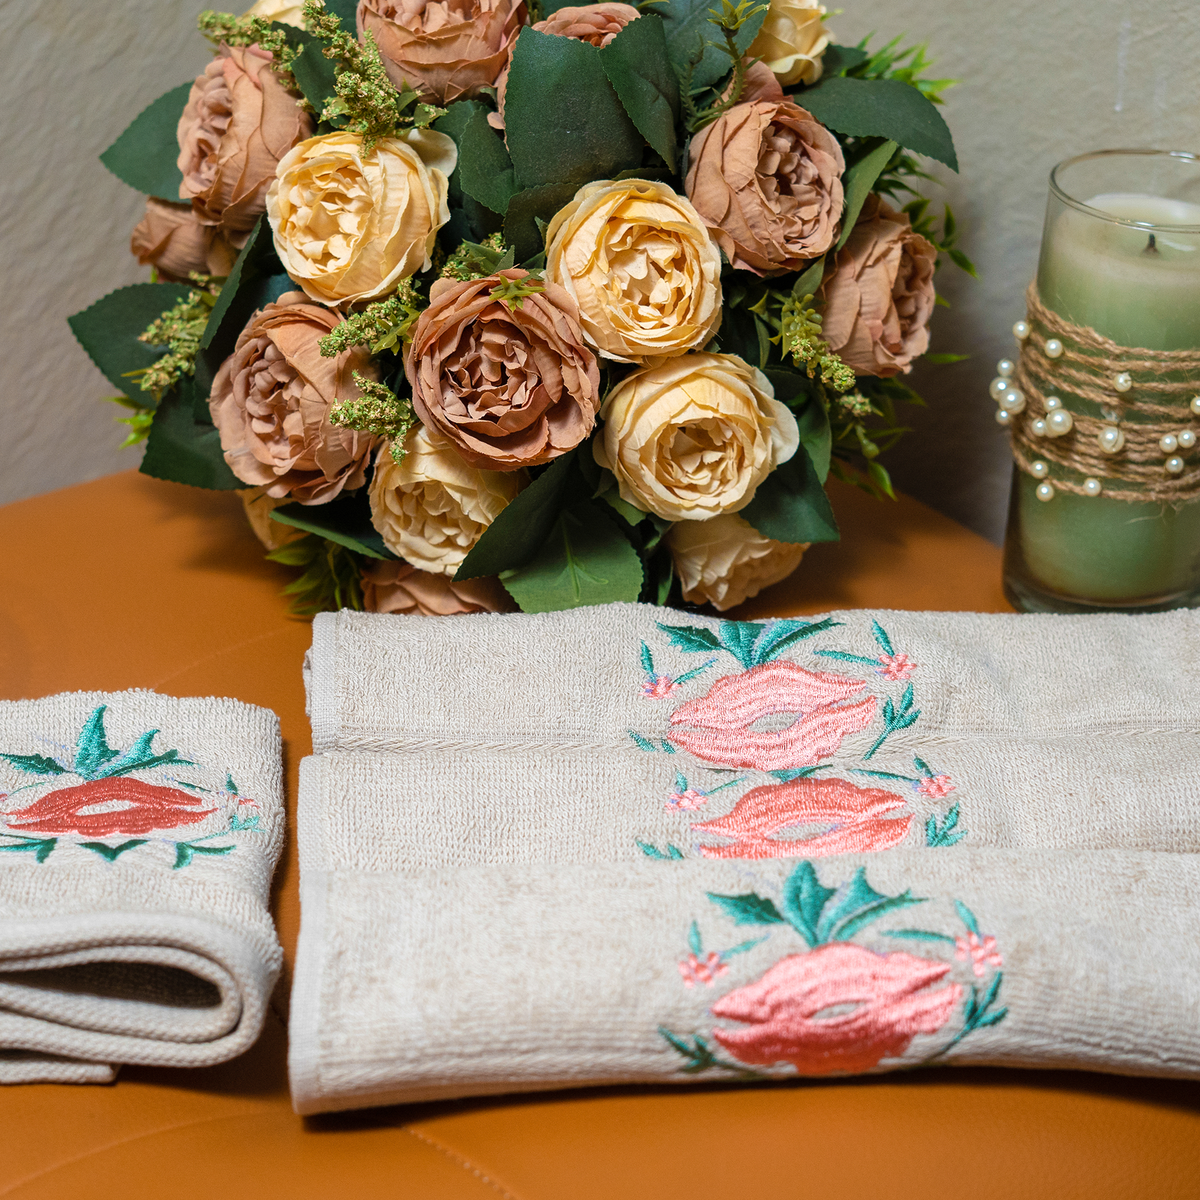 The Luxelife Beige Face Towel with Pink Embroidery